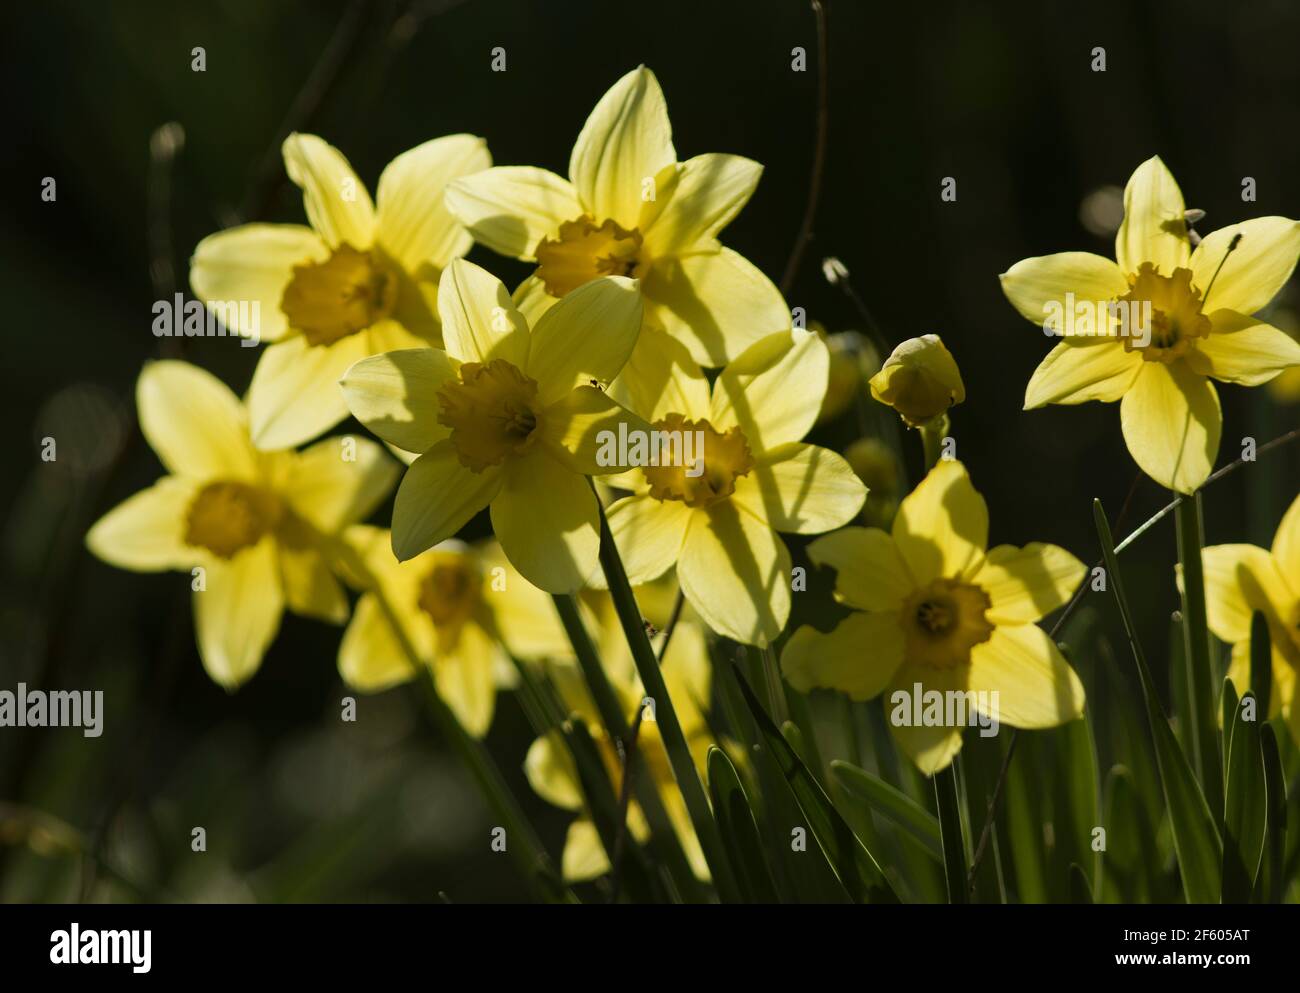 In spring the beds of daffodils erupt in parks, gardens and woodlands bringing an end to the drabness of winter. The Daffodil was introduced to the UK Stock Photo